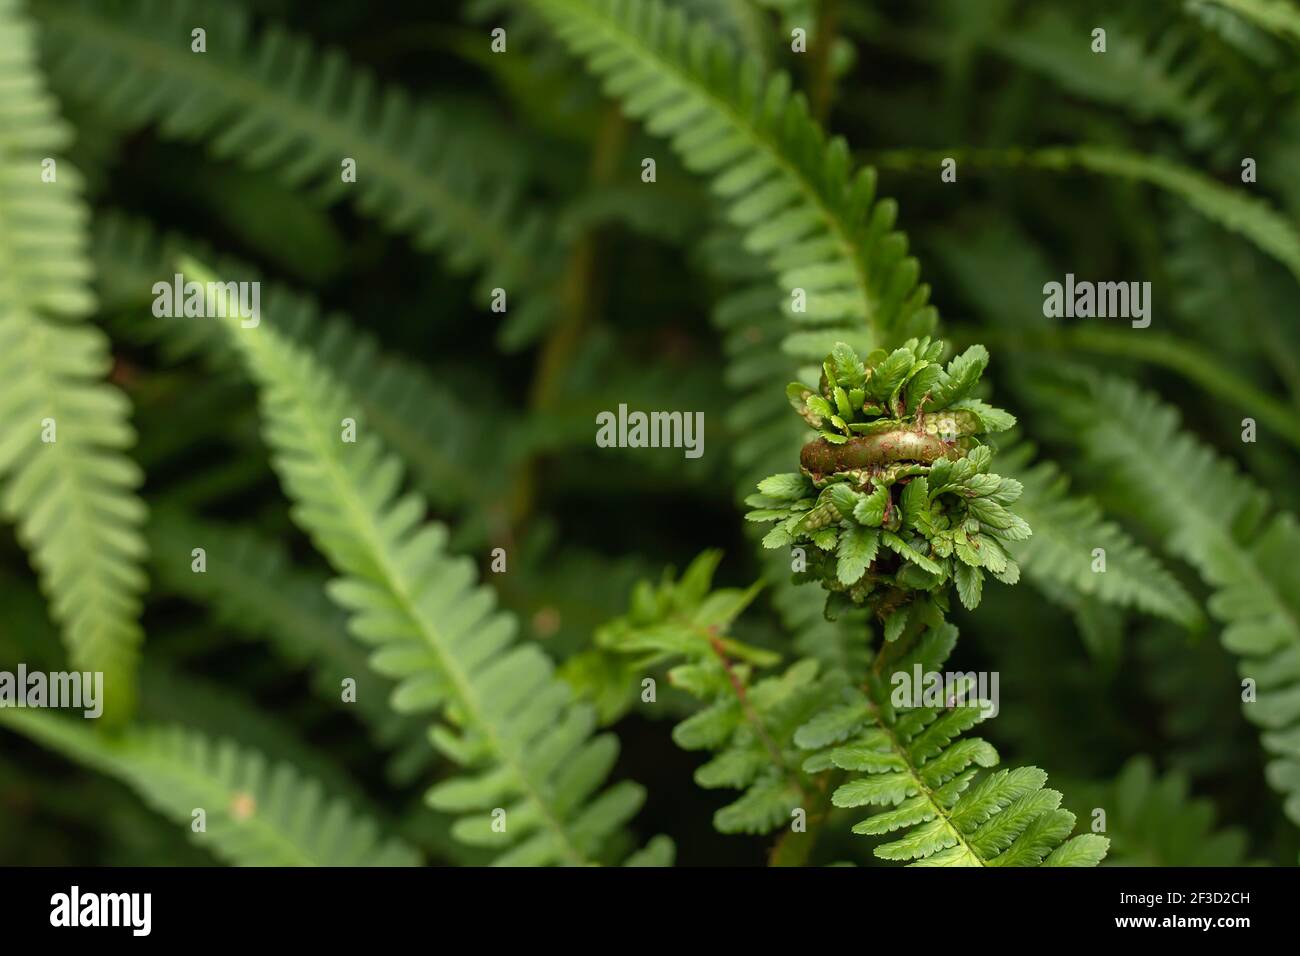 Lady fern green fronds unfolding in spring Stock Photo